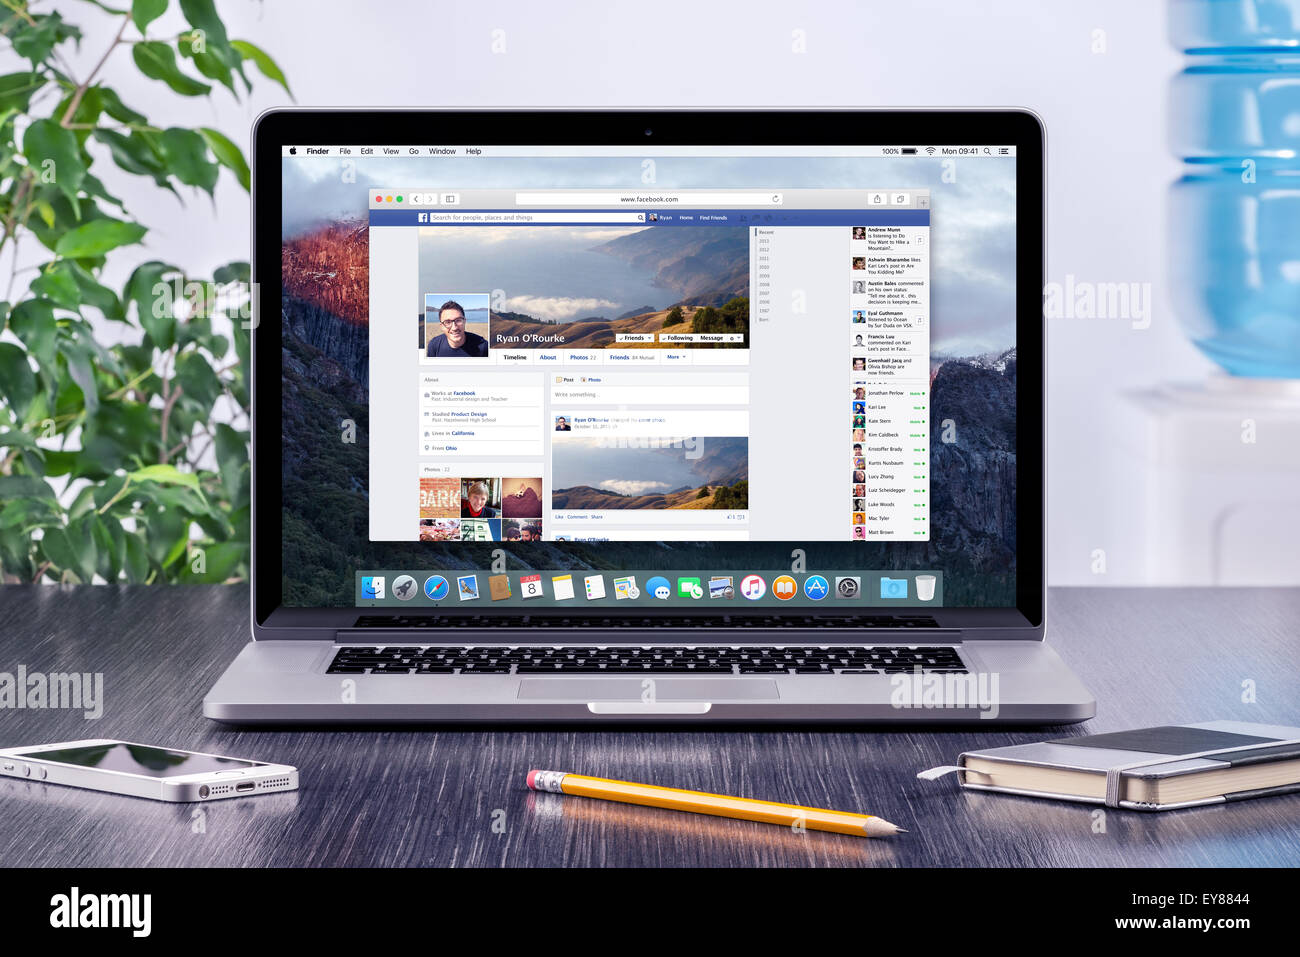 Varna, Bulgaria - May 31, 2015: Facebook Timeline in user profile on Apple Macbook Pro Retina screen that is on wooden desk. Stock Photo